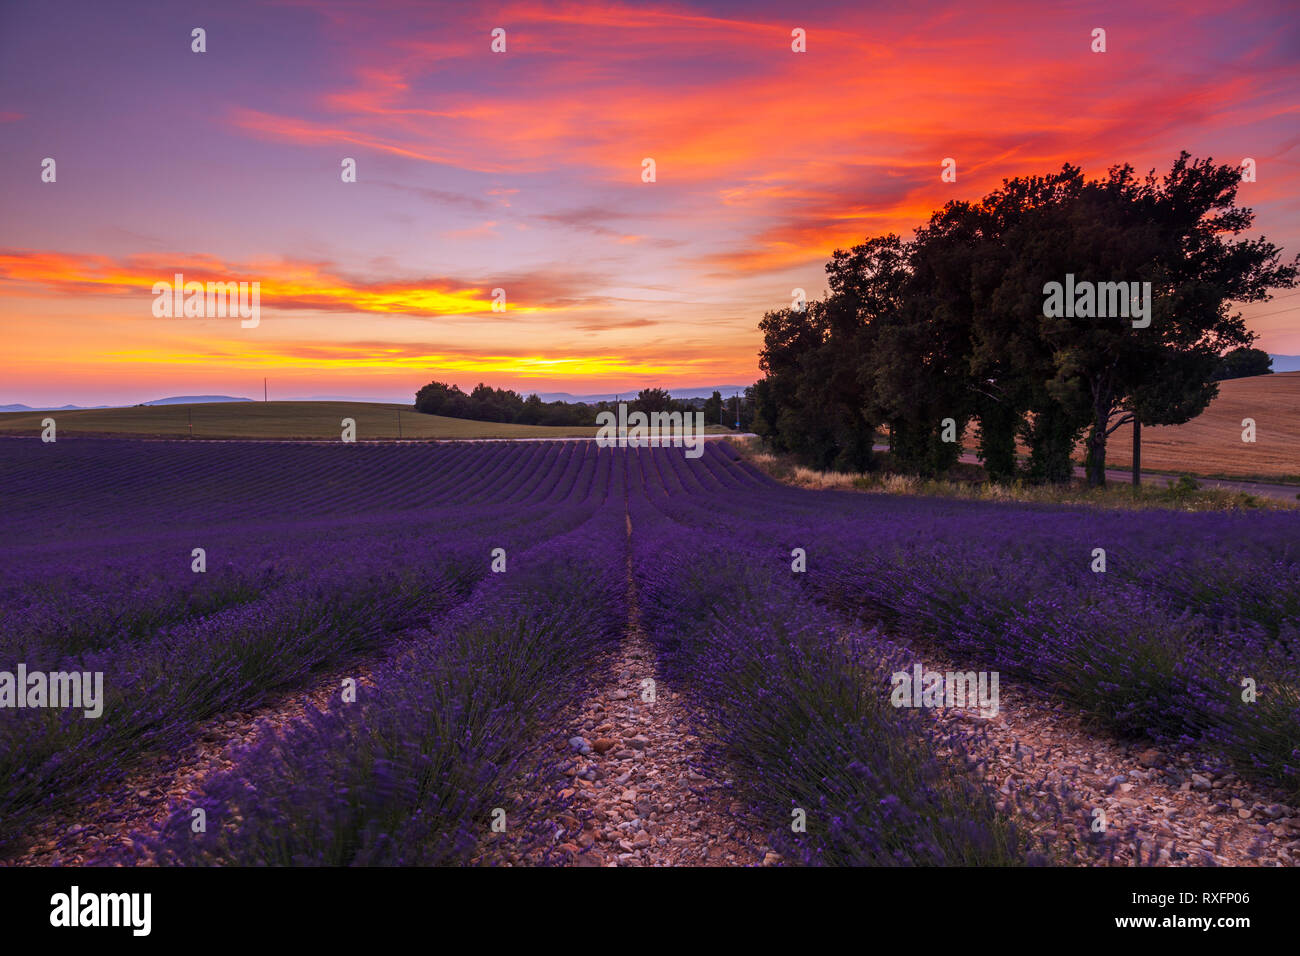 France french cypress photography and Alamy hi-res - stock images trees